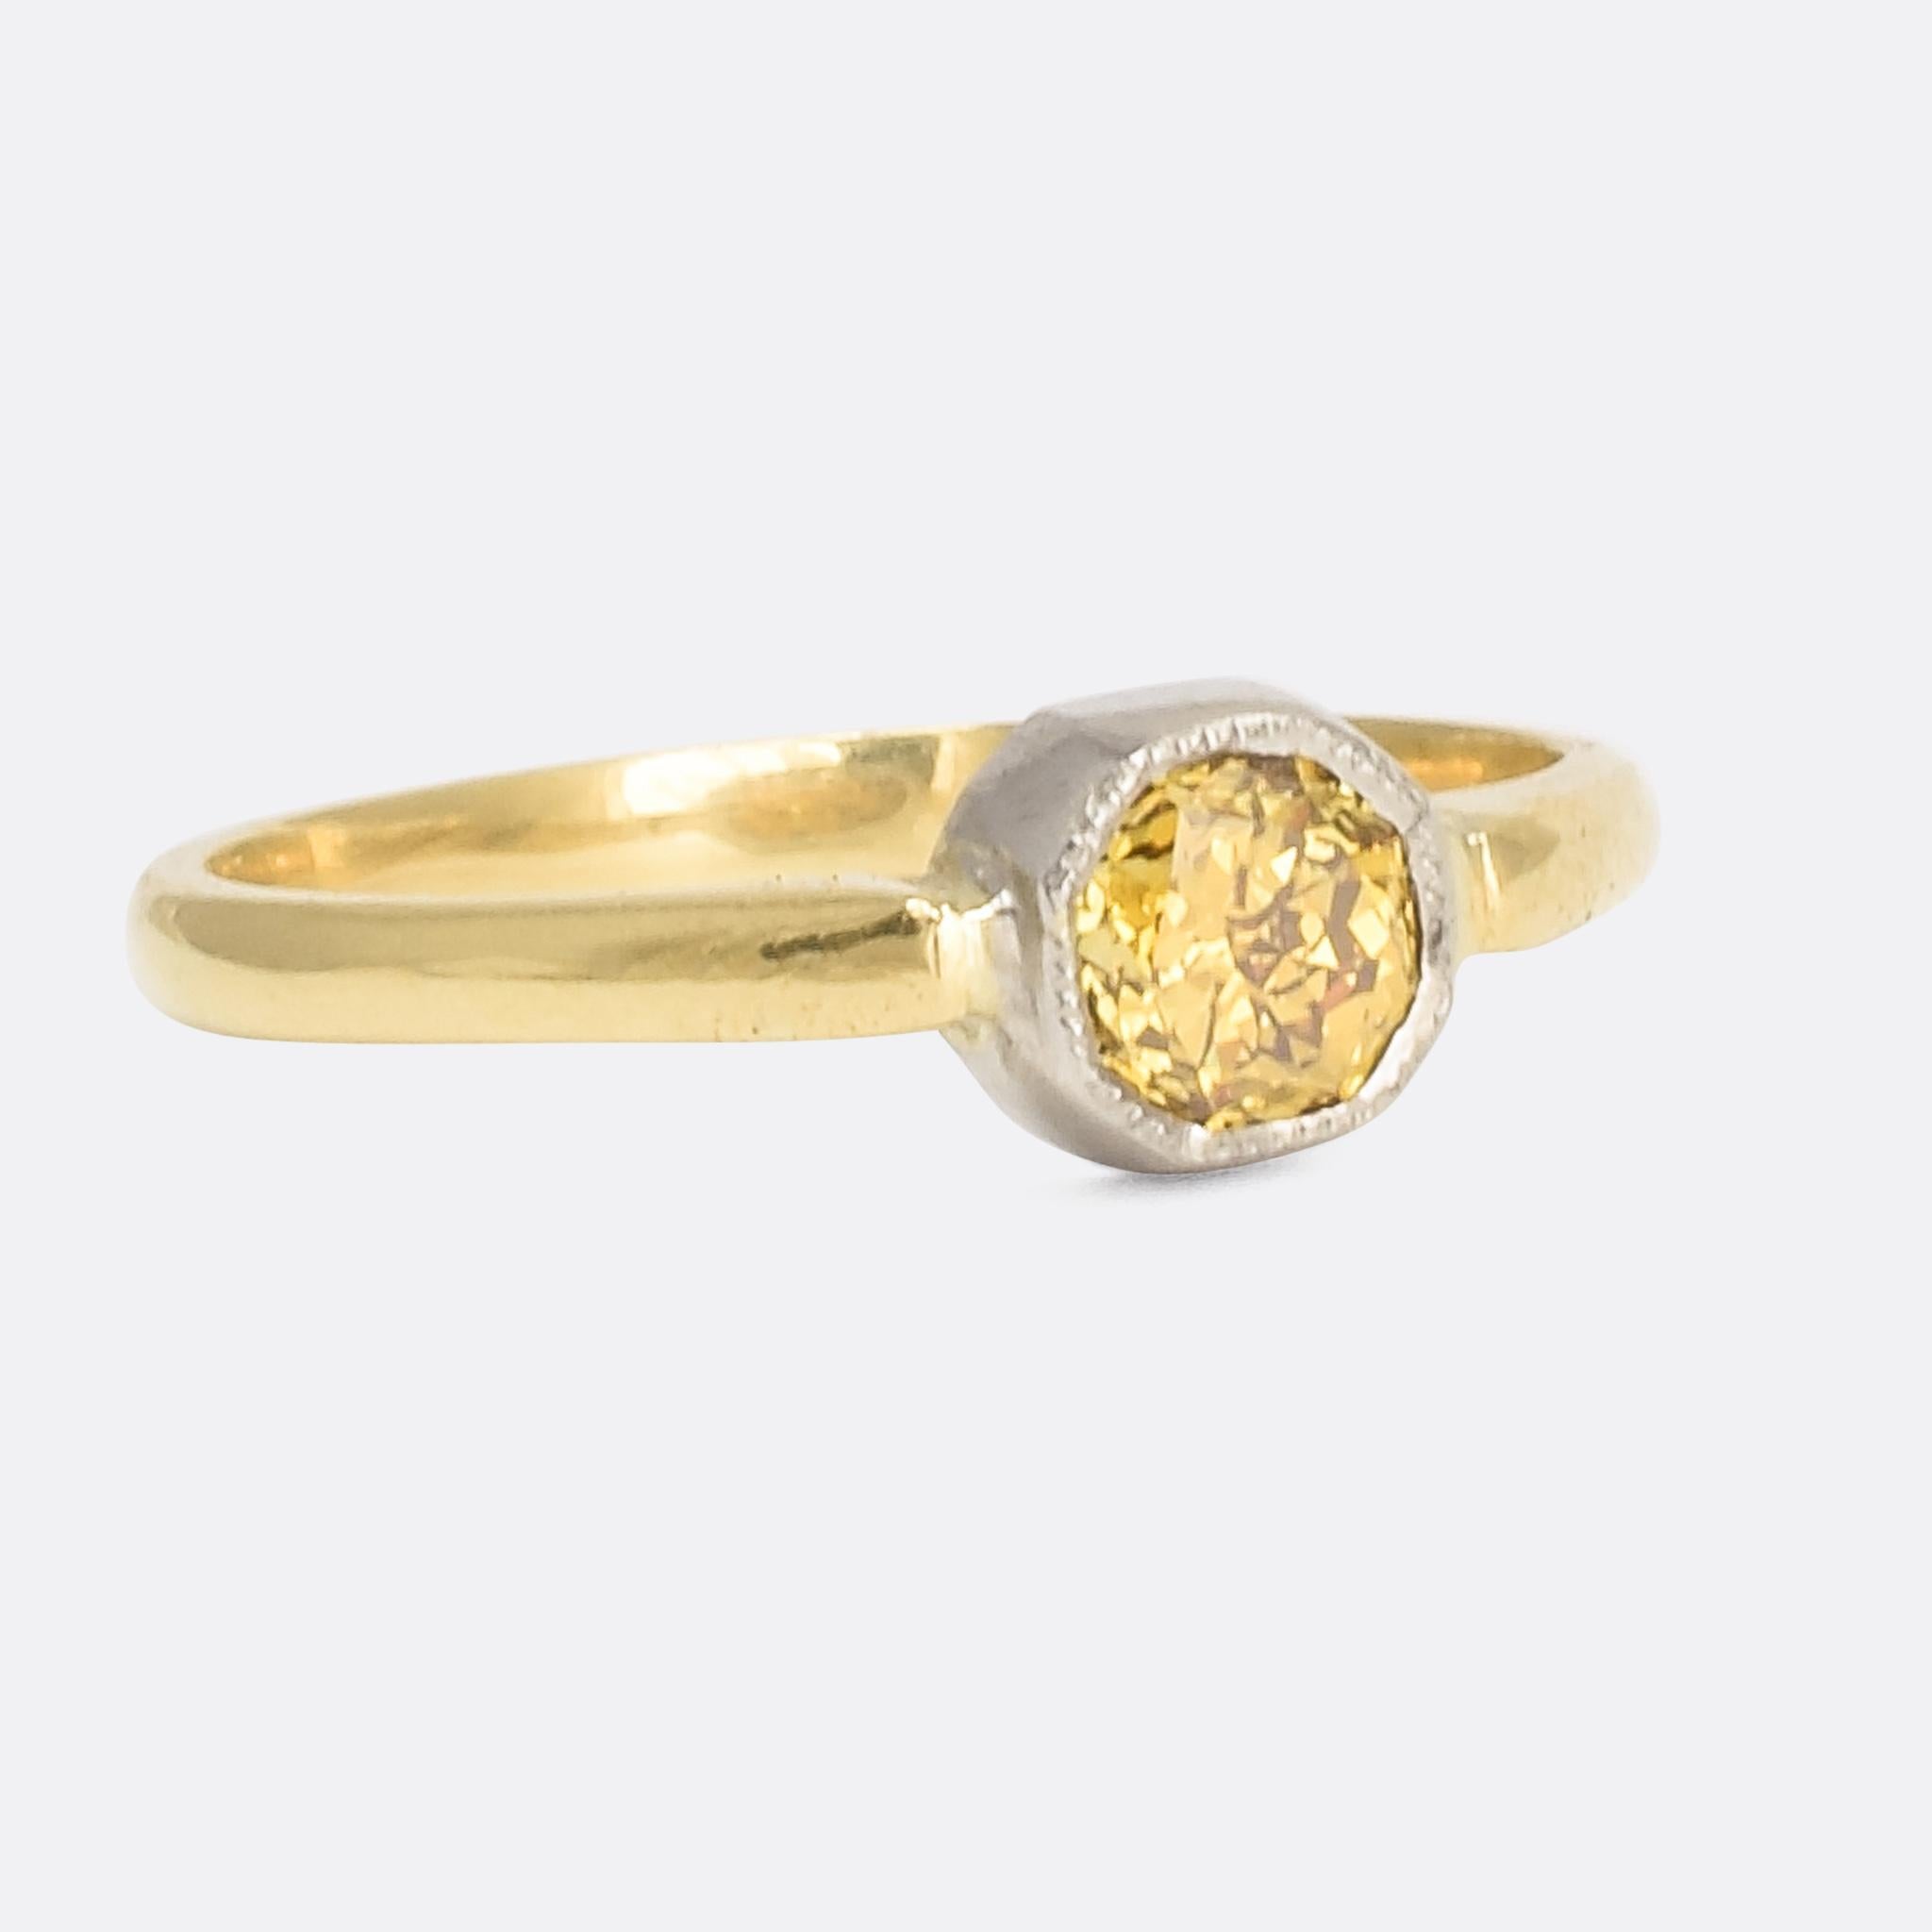 A unique diamond solitaire ring designed by Butter Lane and set with a exceptional vintage coloured diamond. The stone is certified as .56ct Fancy Intense Orangish-Yellow, VS1 clarity and modified octagonal cut - with natural colour and no evidence